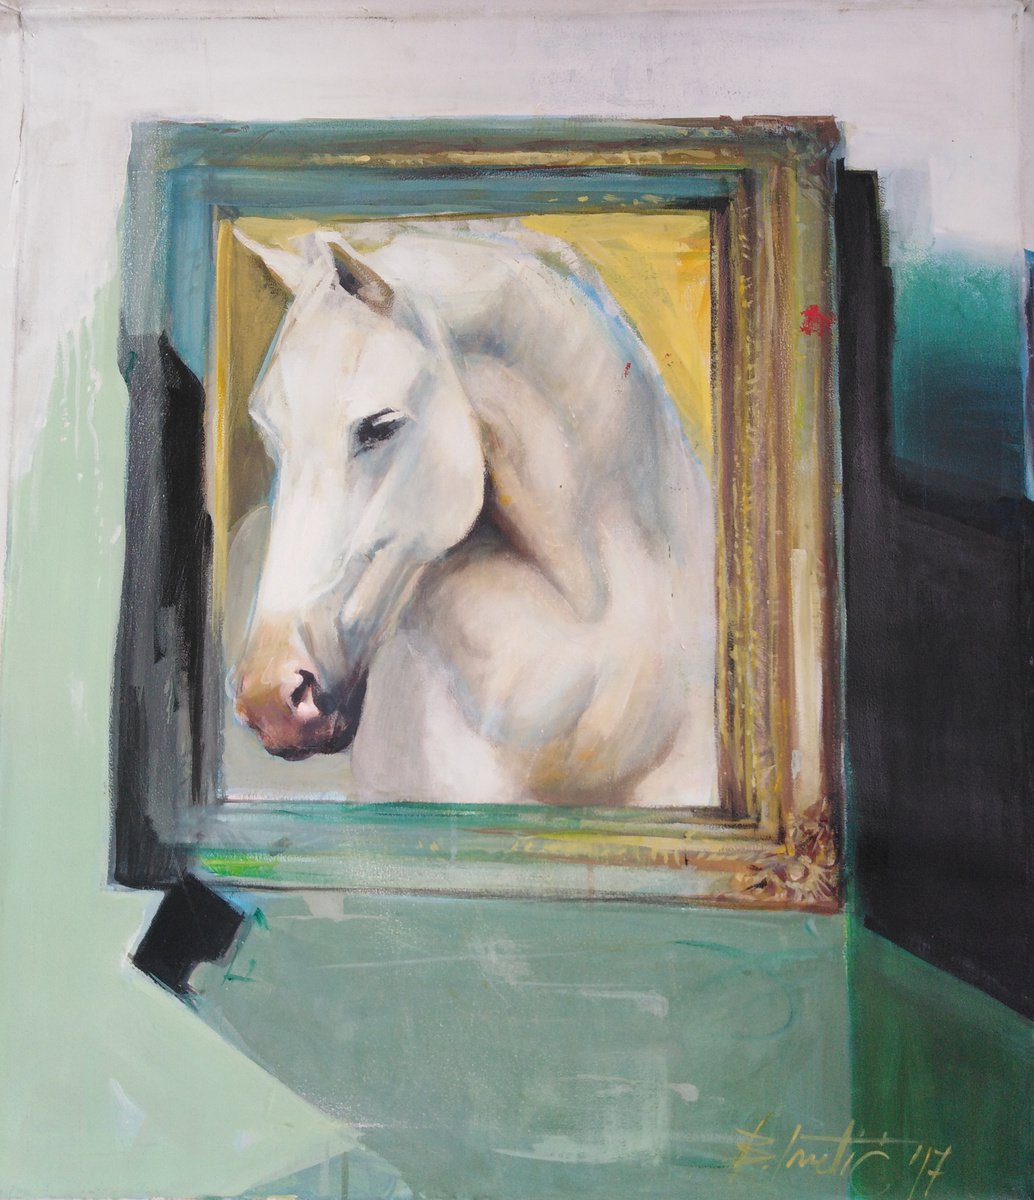 WHITE HORSE by Boro Ivetic